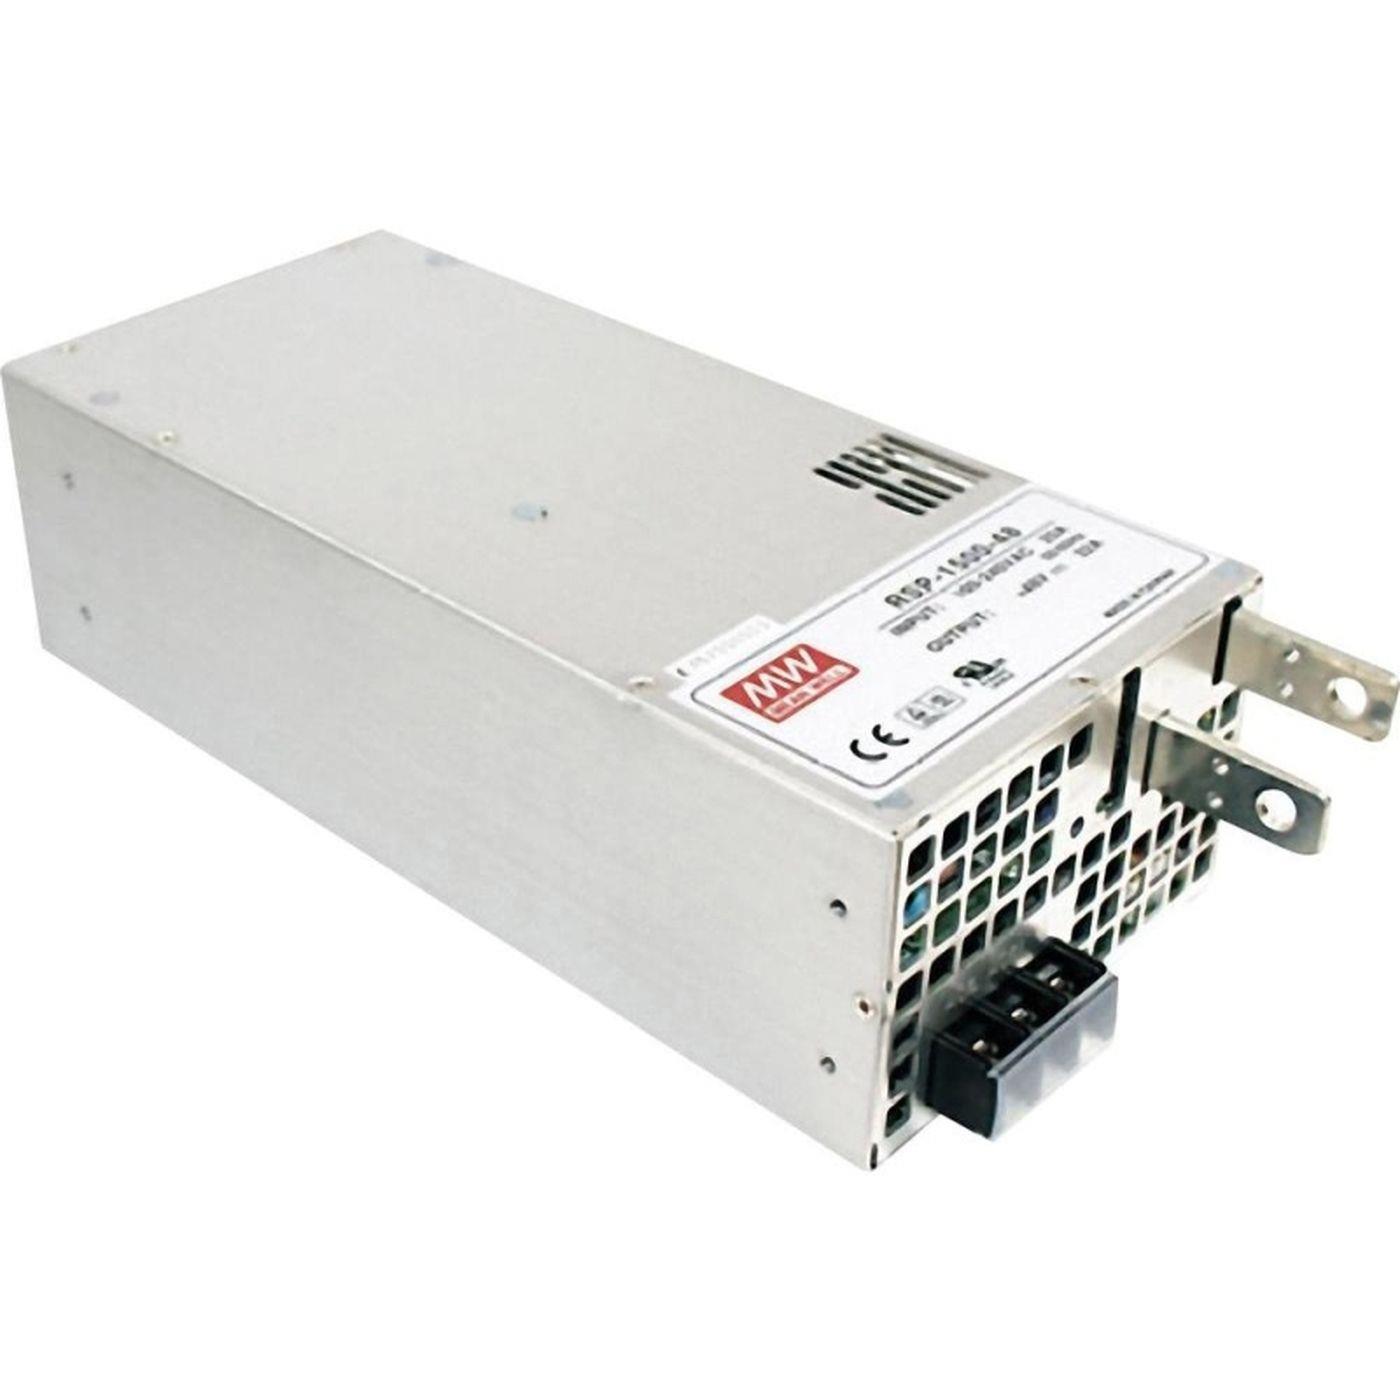 RSP-1500-27 1500W 27V 56A Industrial power supply